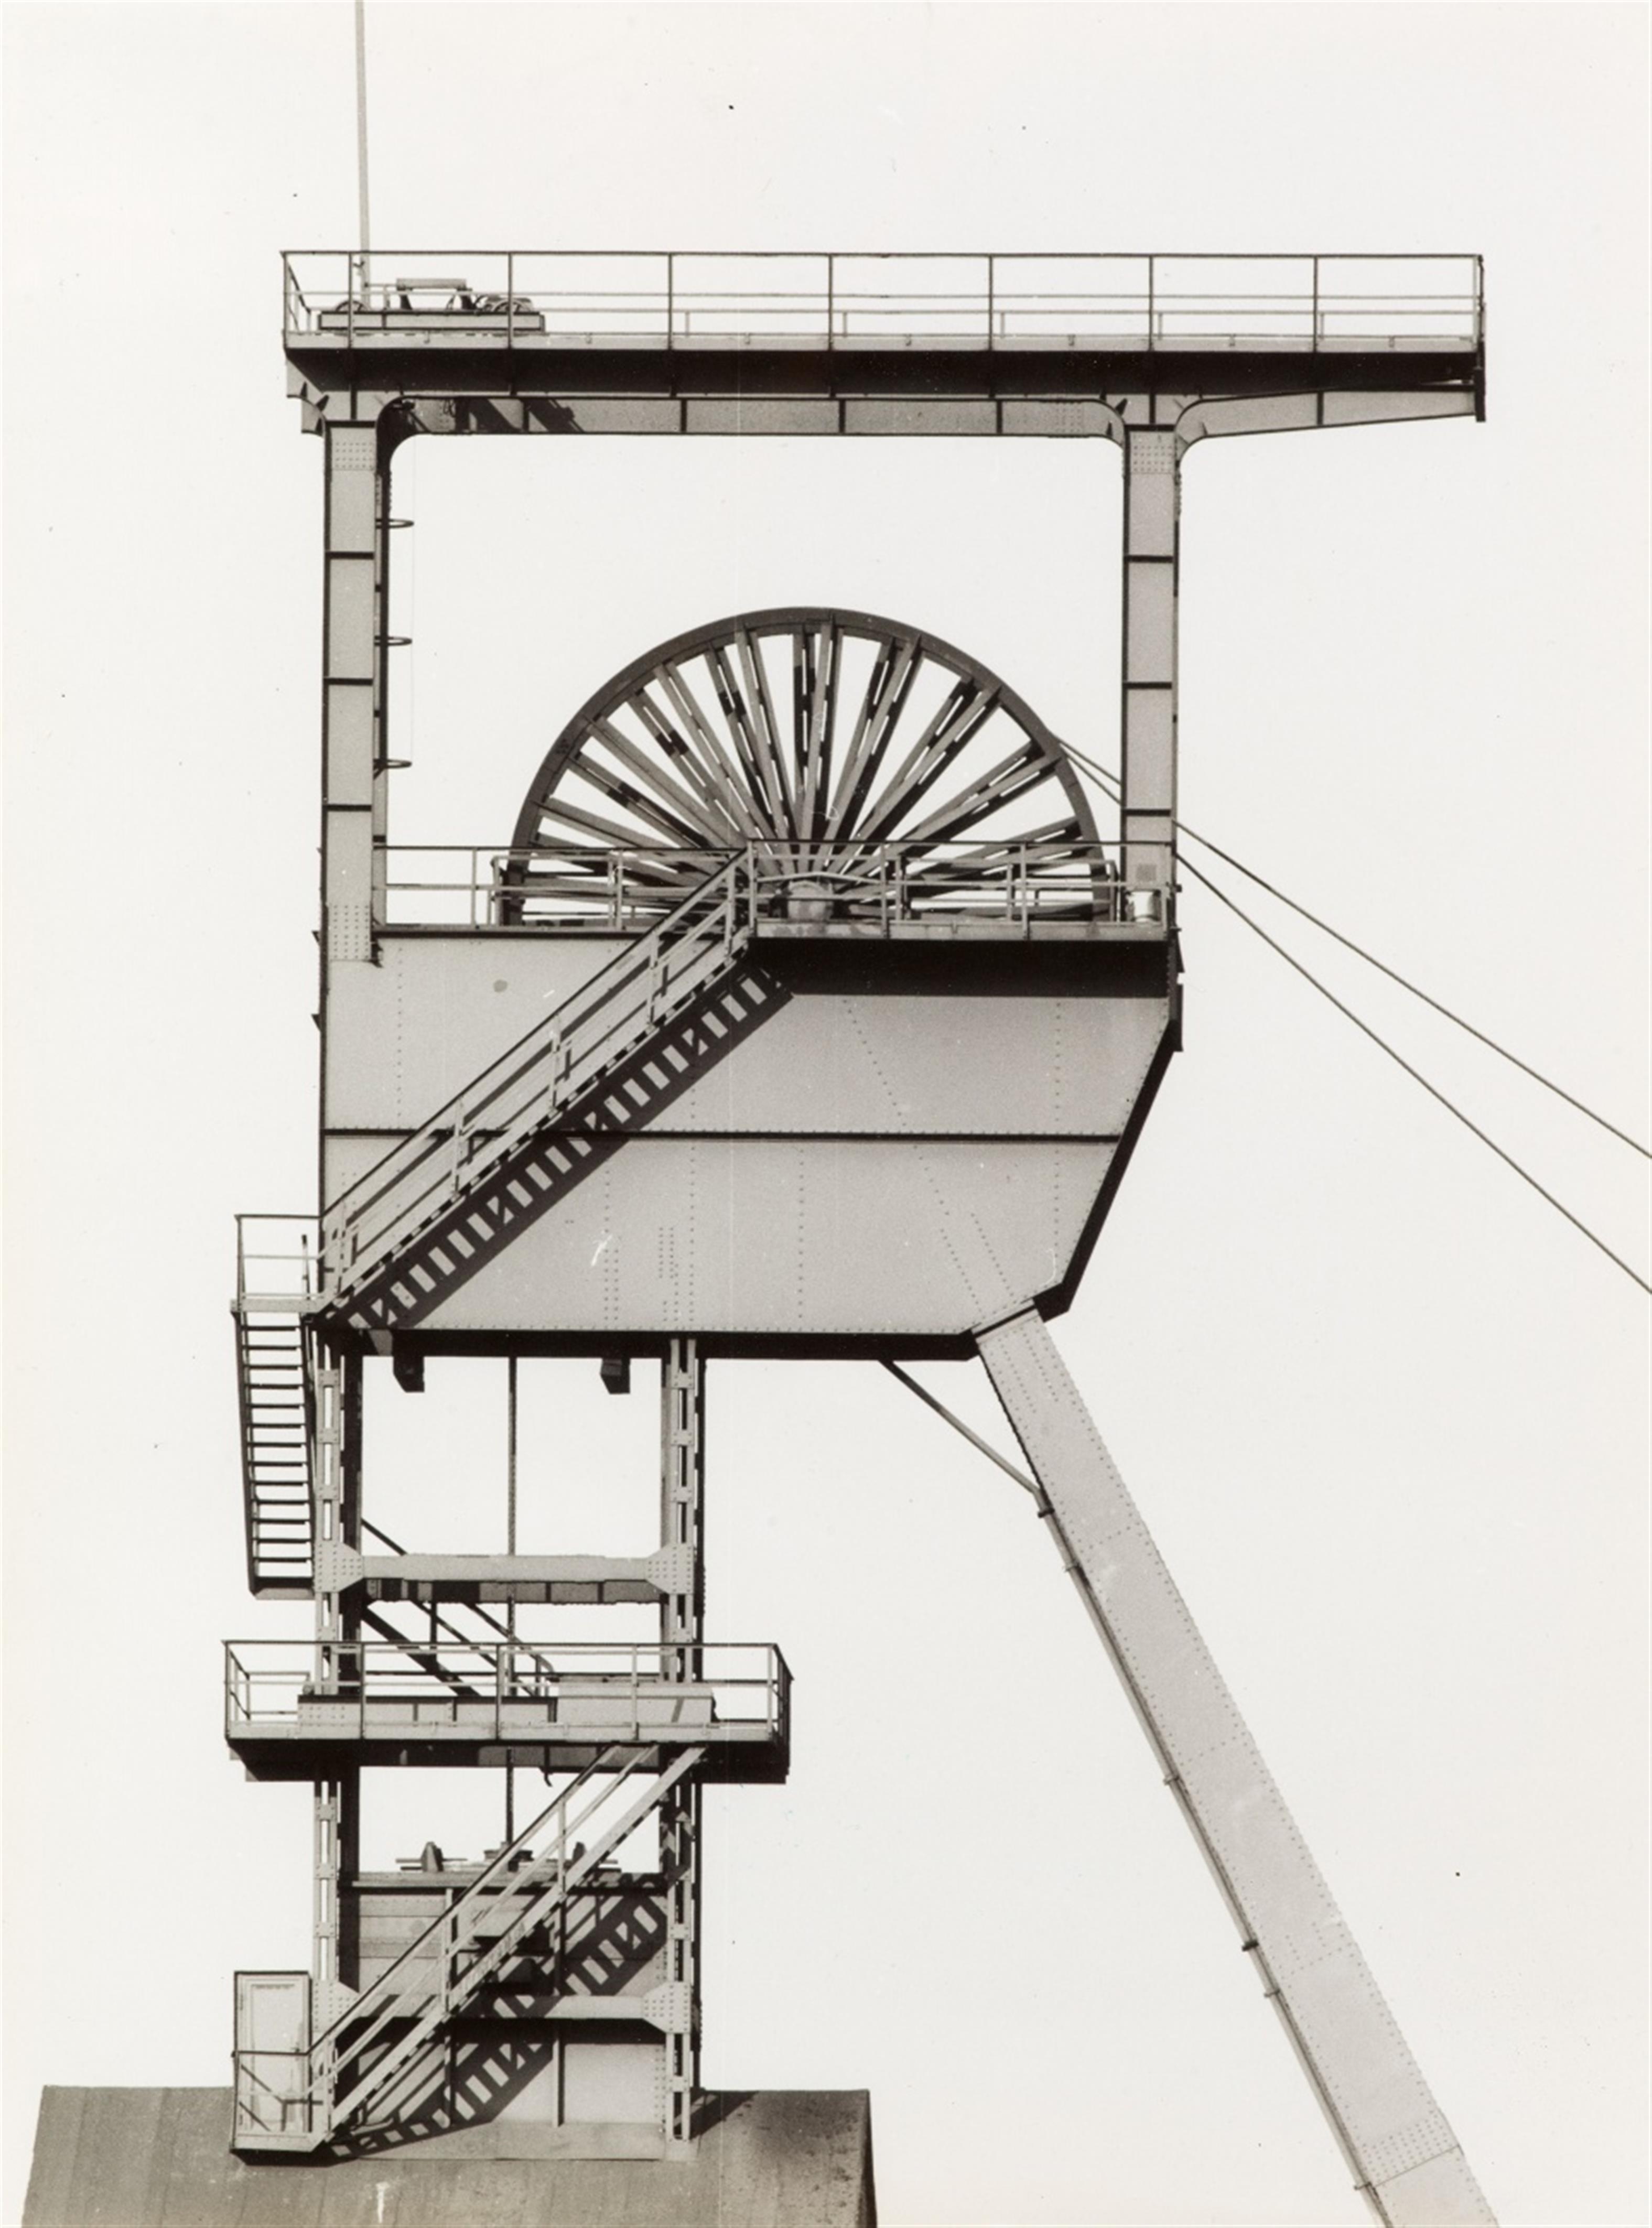 Bernd and Hilla Becher - Winding towers - image-7